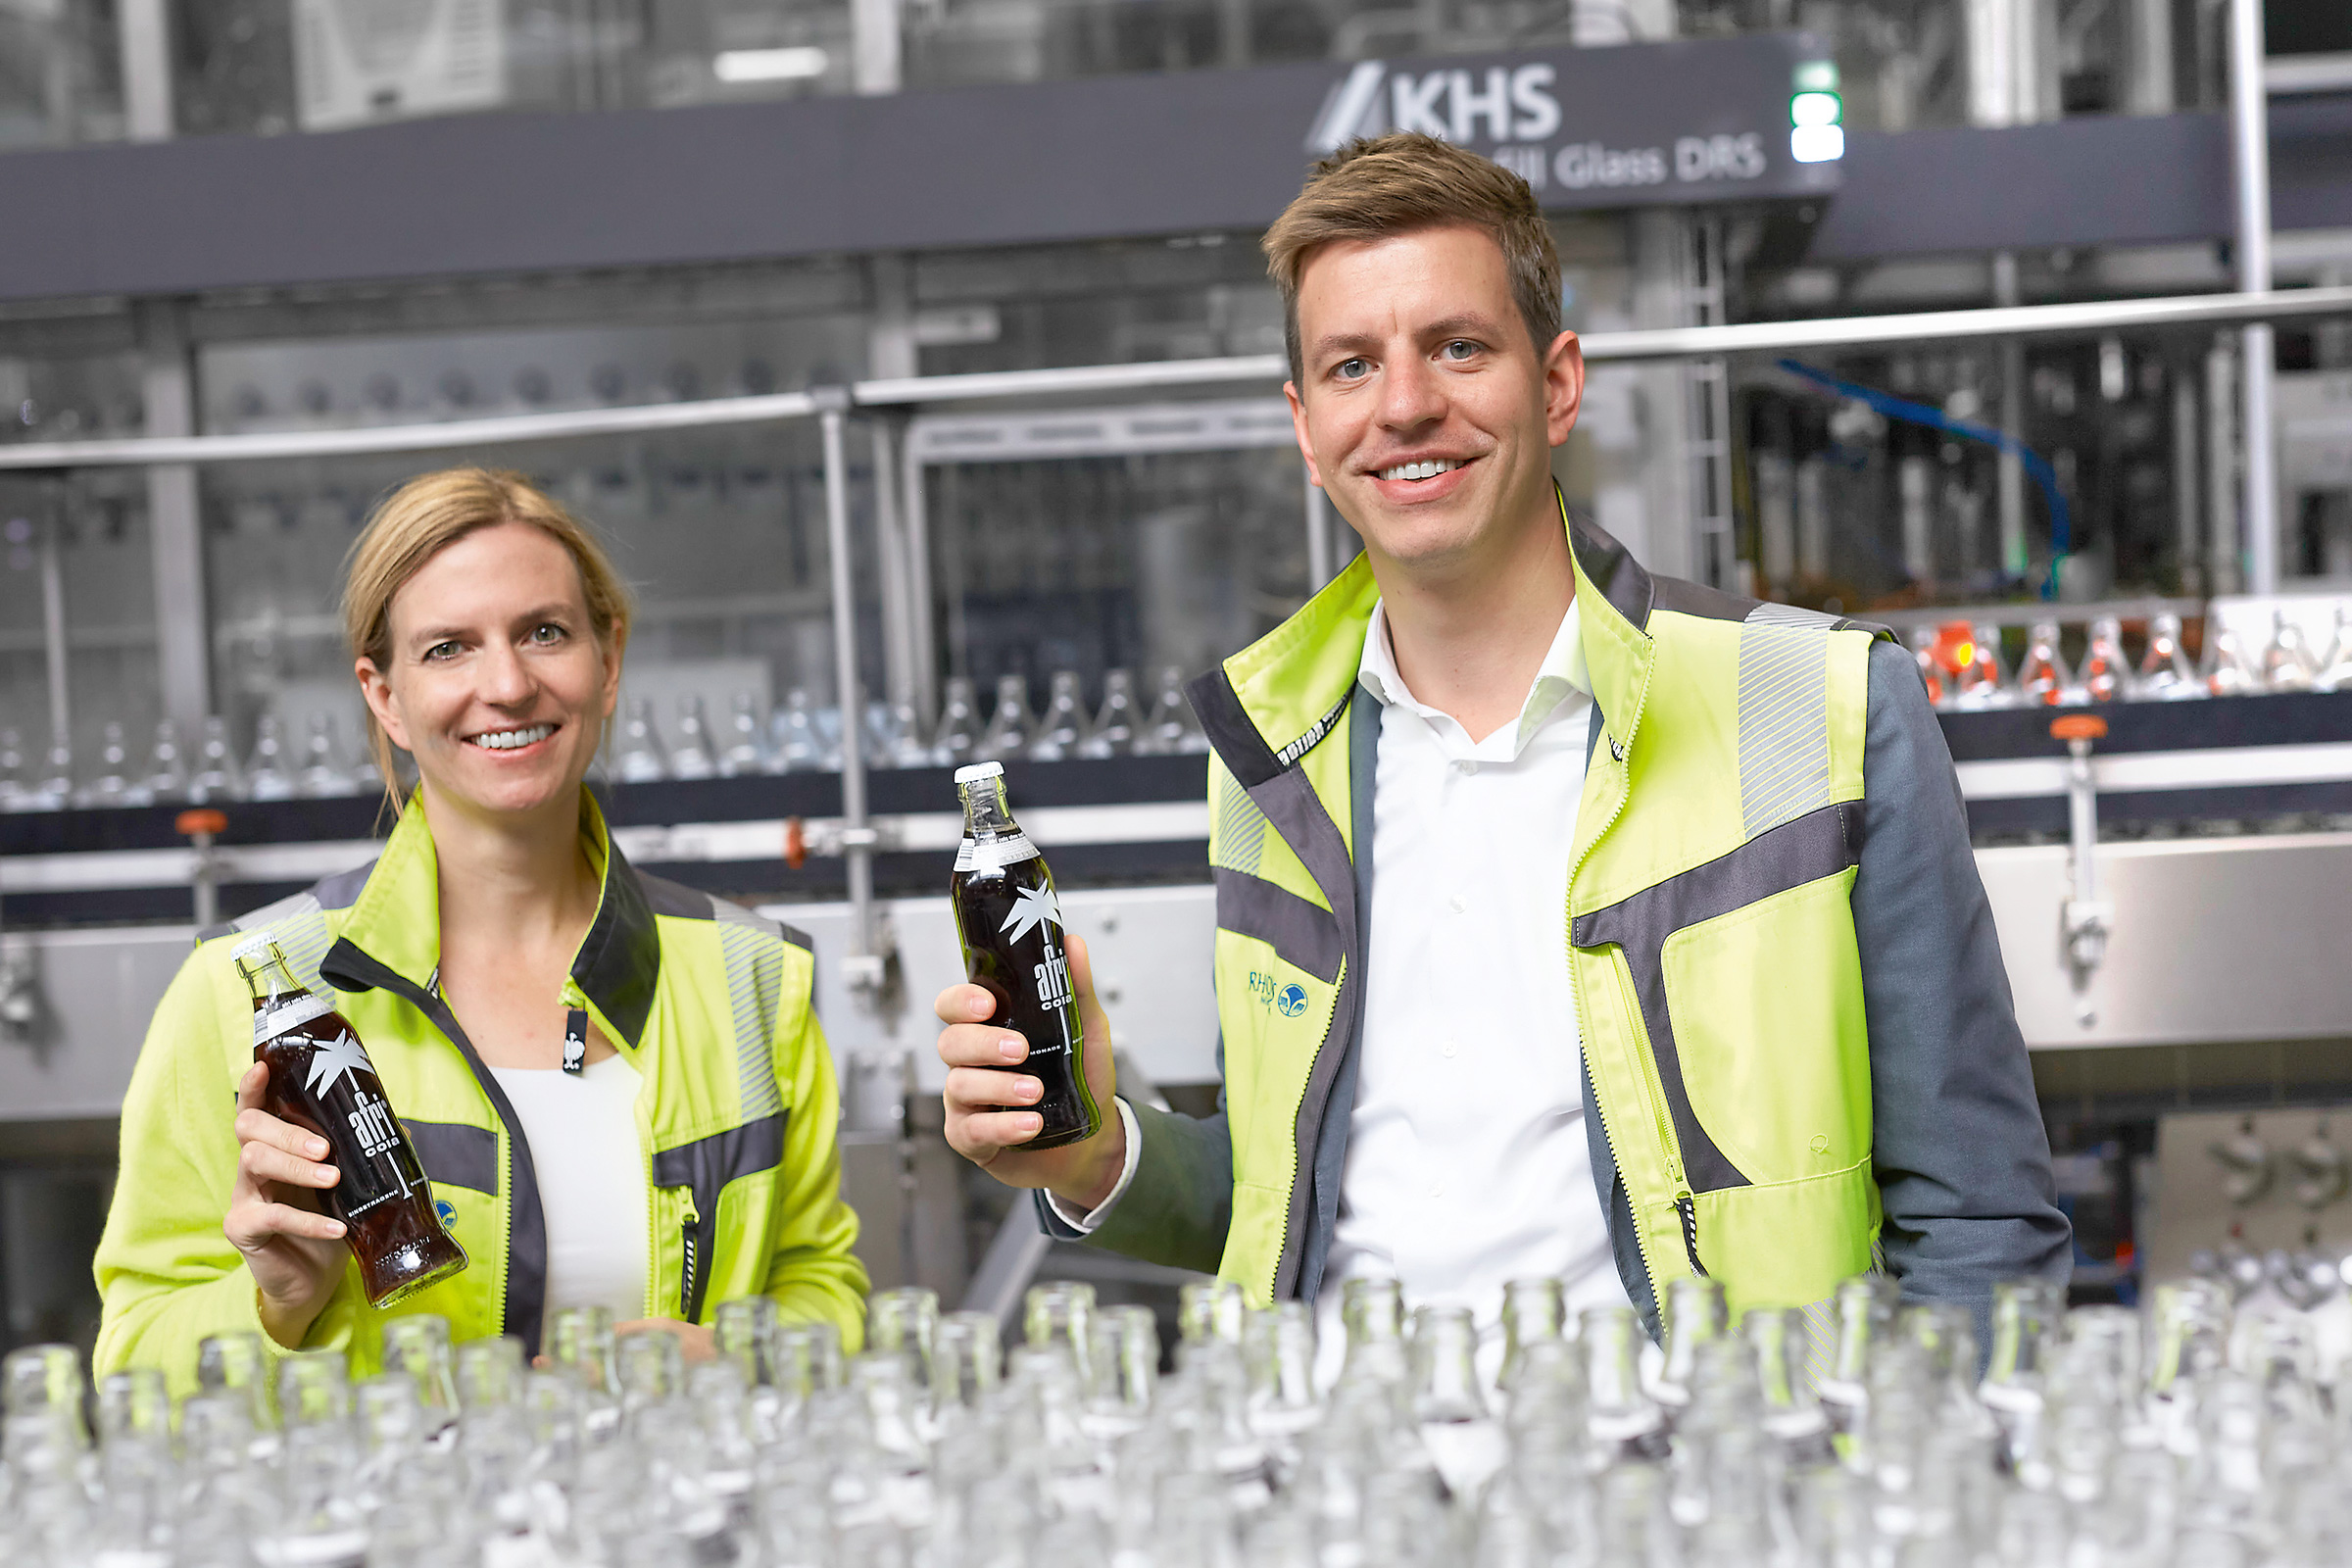 RHODIUS Mineralquellen is managed by sibling managing directors Frauke Helf and Hannes Tack.